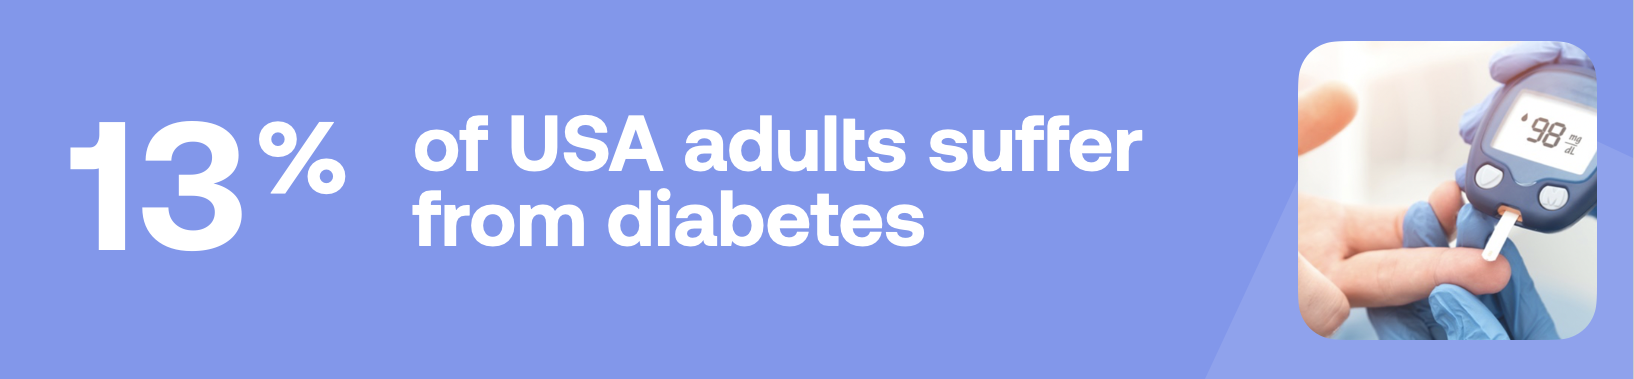 13% of USA adults suffer from diabetes